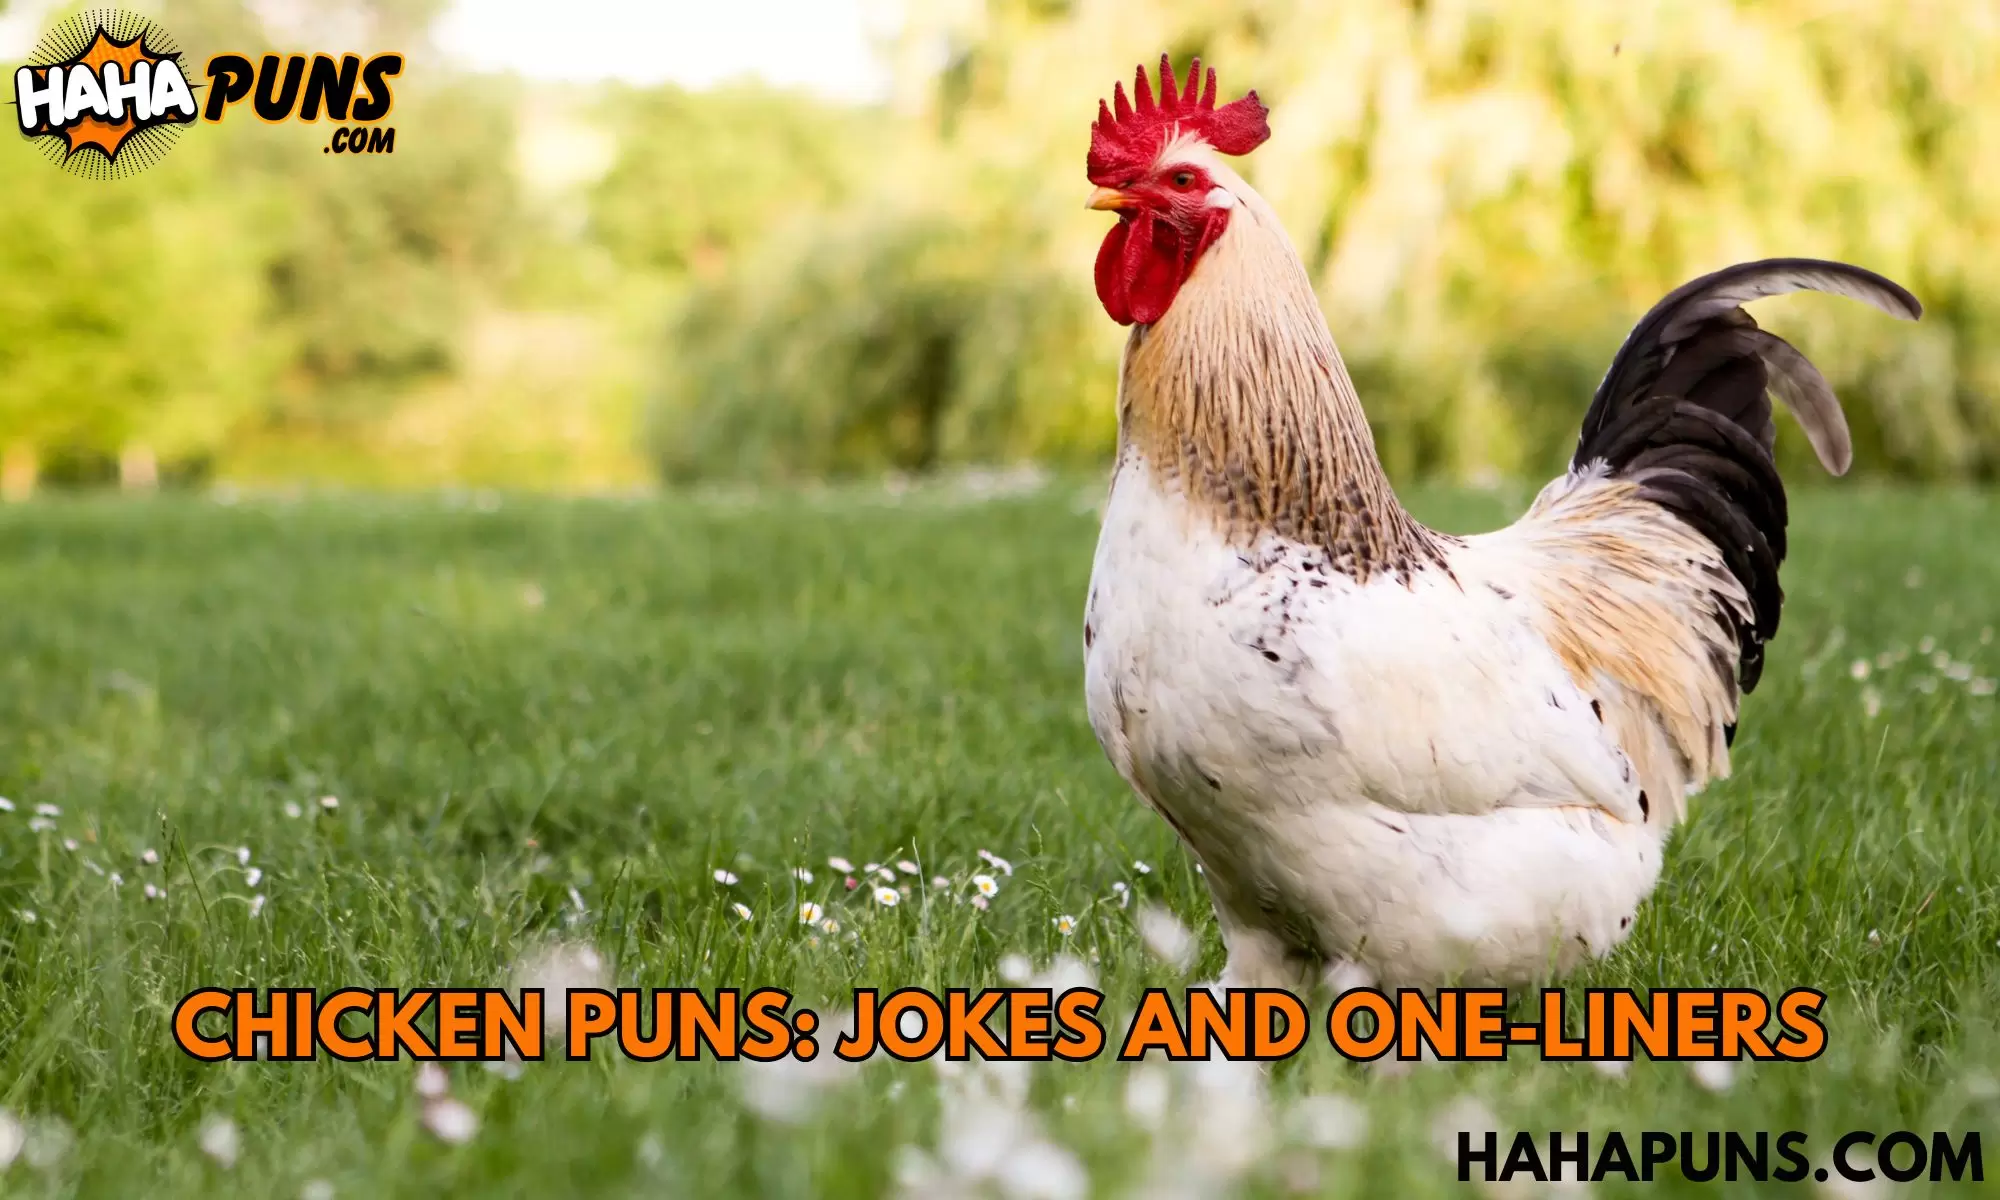 Chicken Puns: Jokes And One-Liners